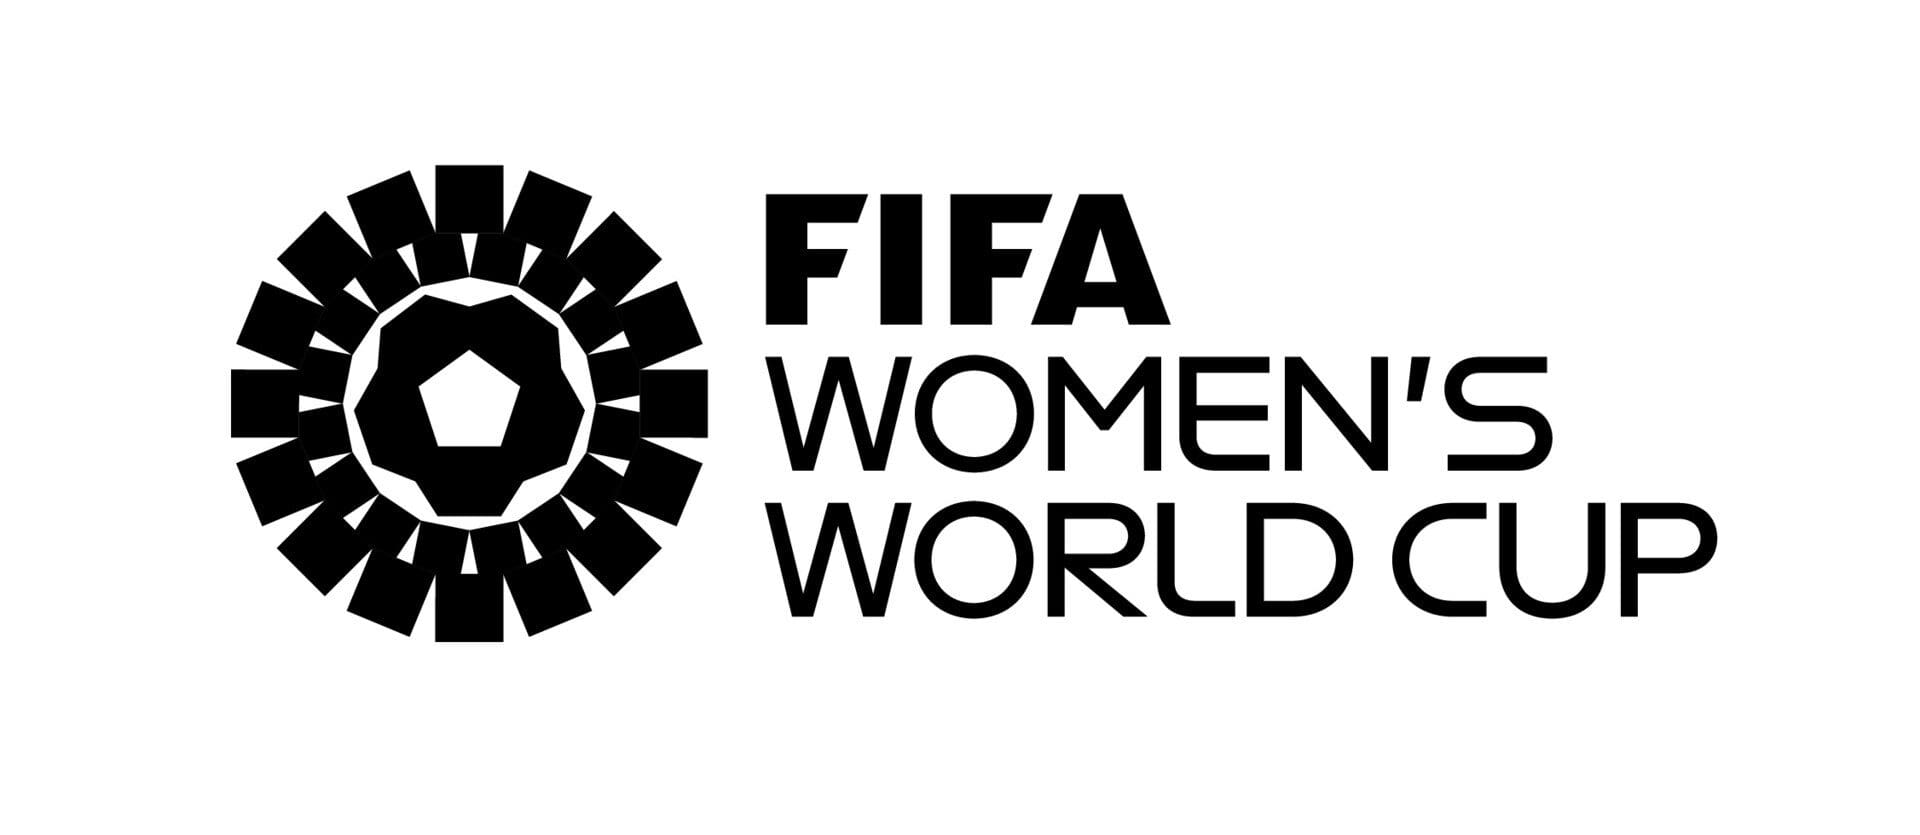 “UM Experts Ready to Discuss the 2023 FIFA Women’s World Cup” Better